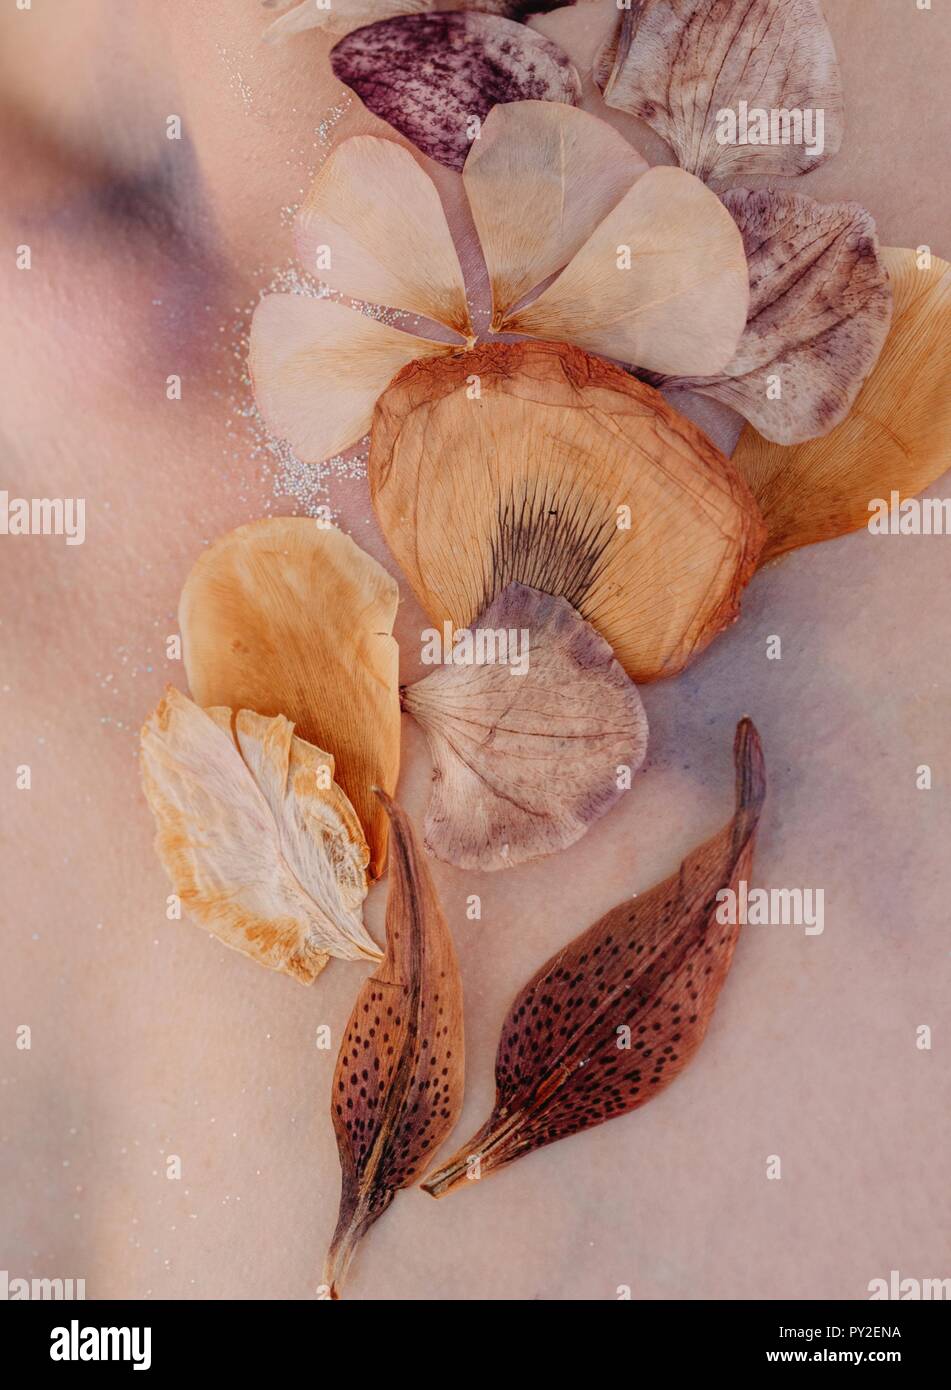 Conceptual beauty portrait of a woman with dried flowers on her face Stock Photo